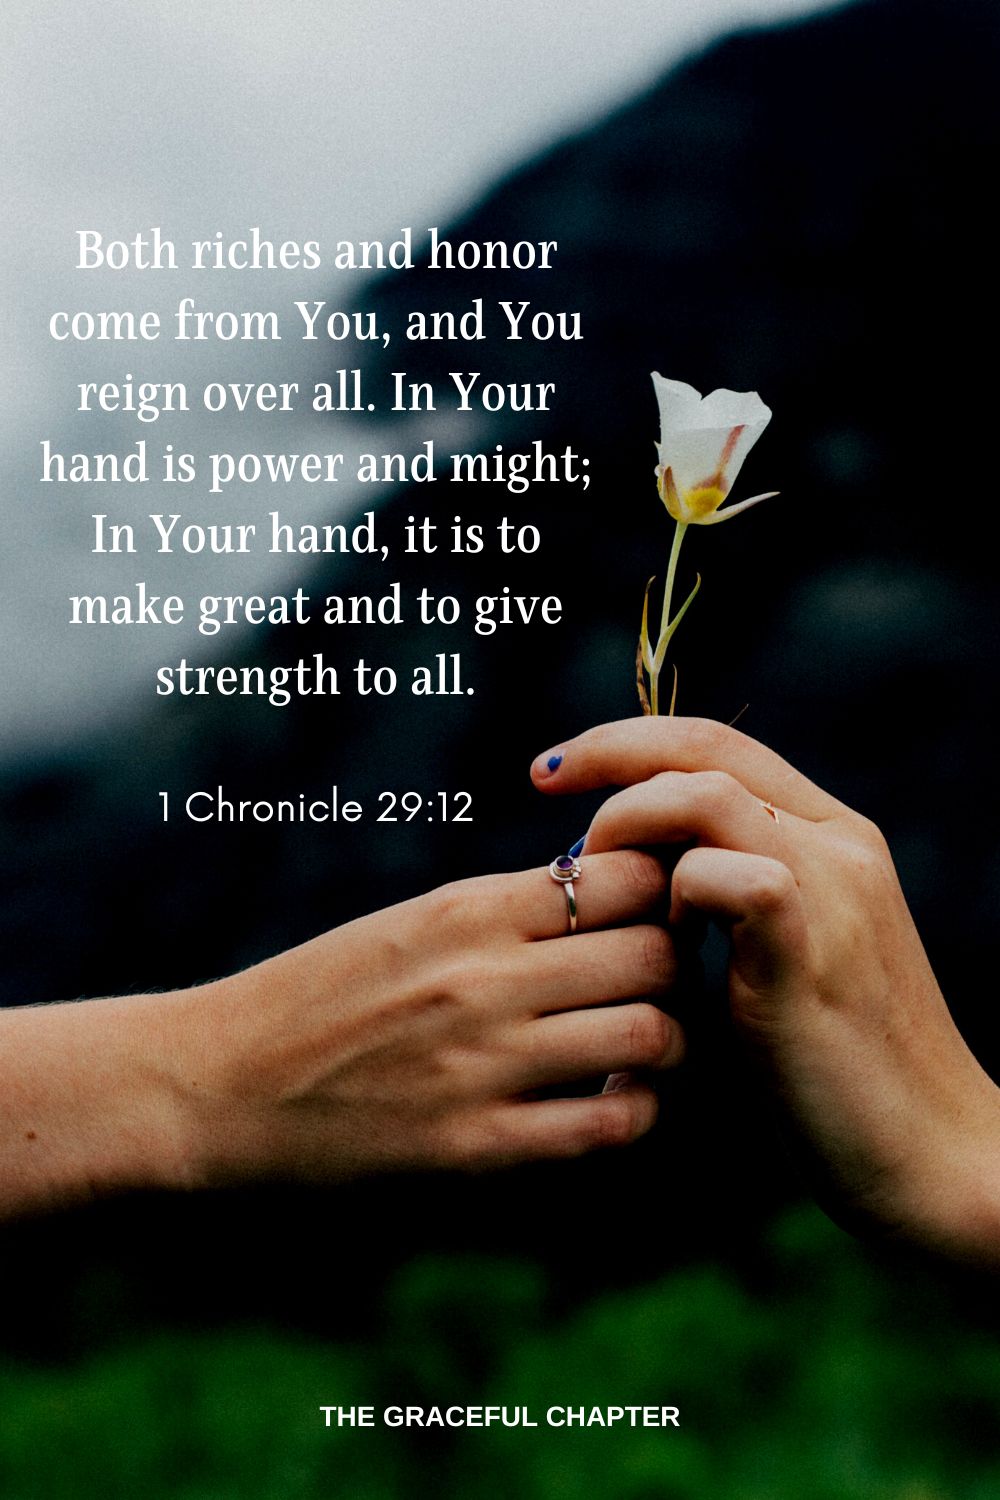 Both riches and honor come from You, and You reign over all. In Your hand is power and might; In Your hand, it is to make great and to give strength to all. 1 Chronicle 29:12